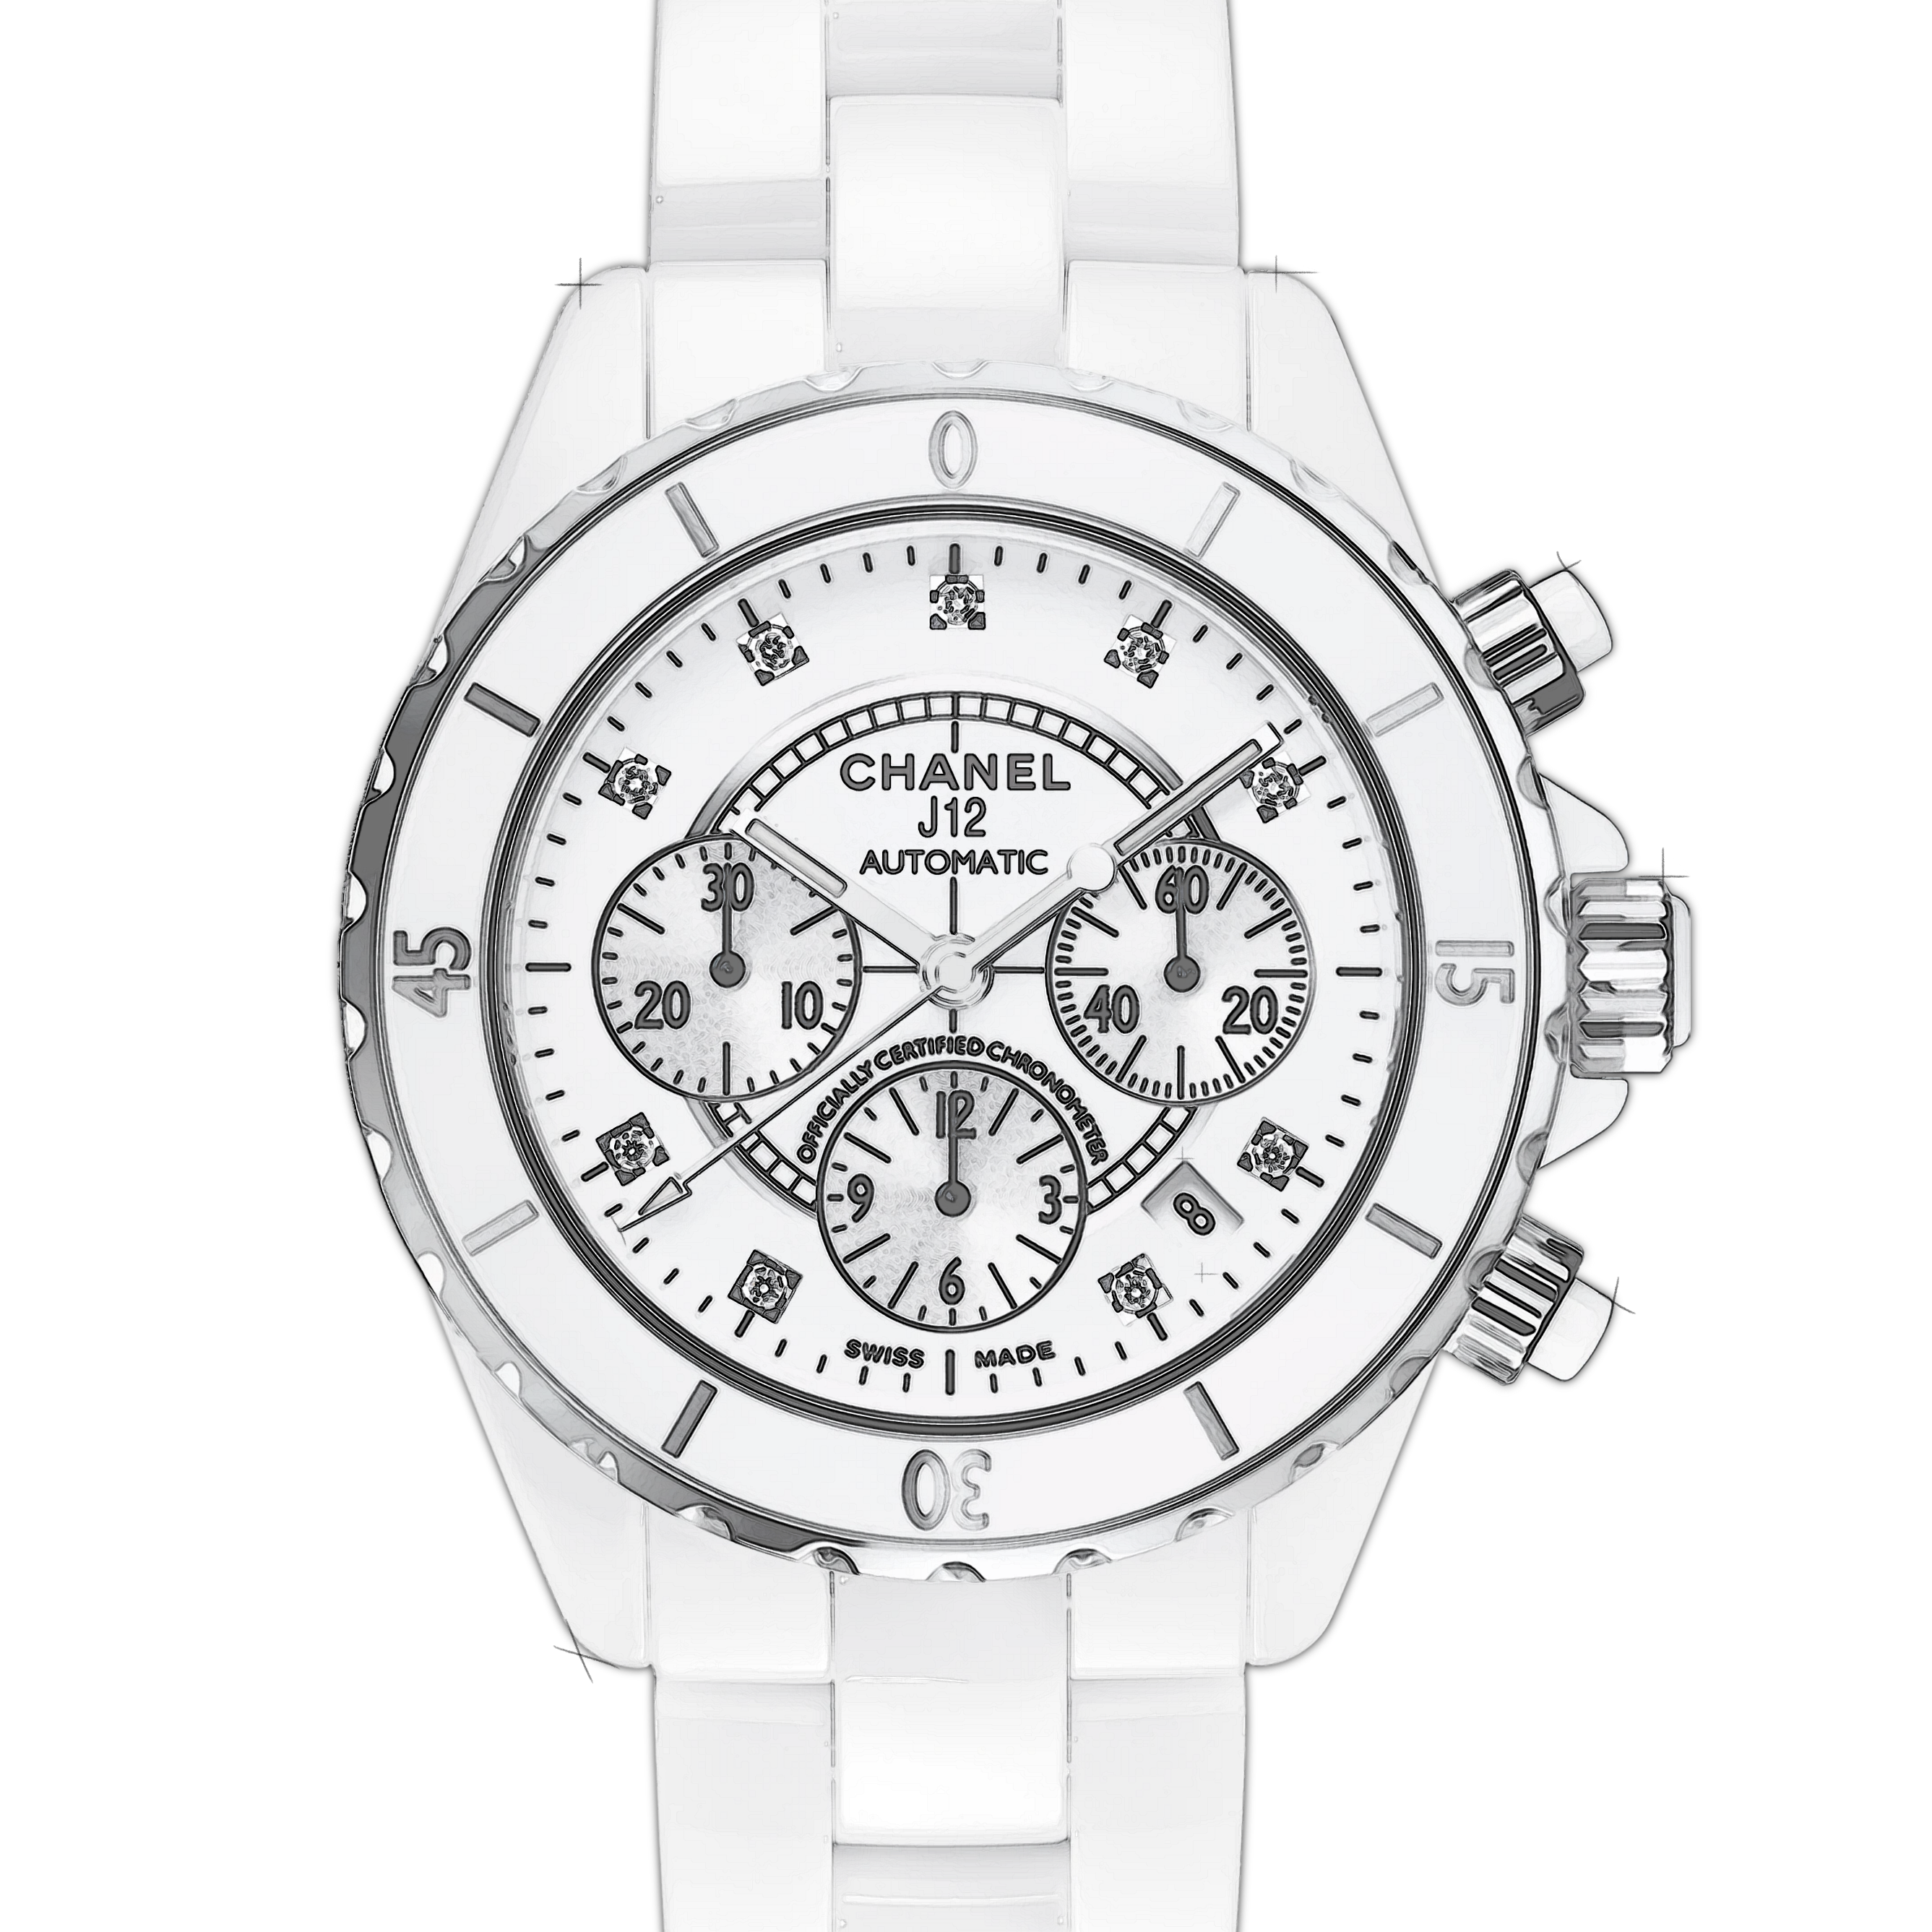 Chanel Watches at Discounted Prices  PrestigeTimecom